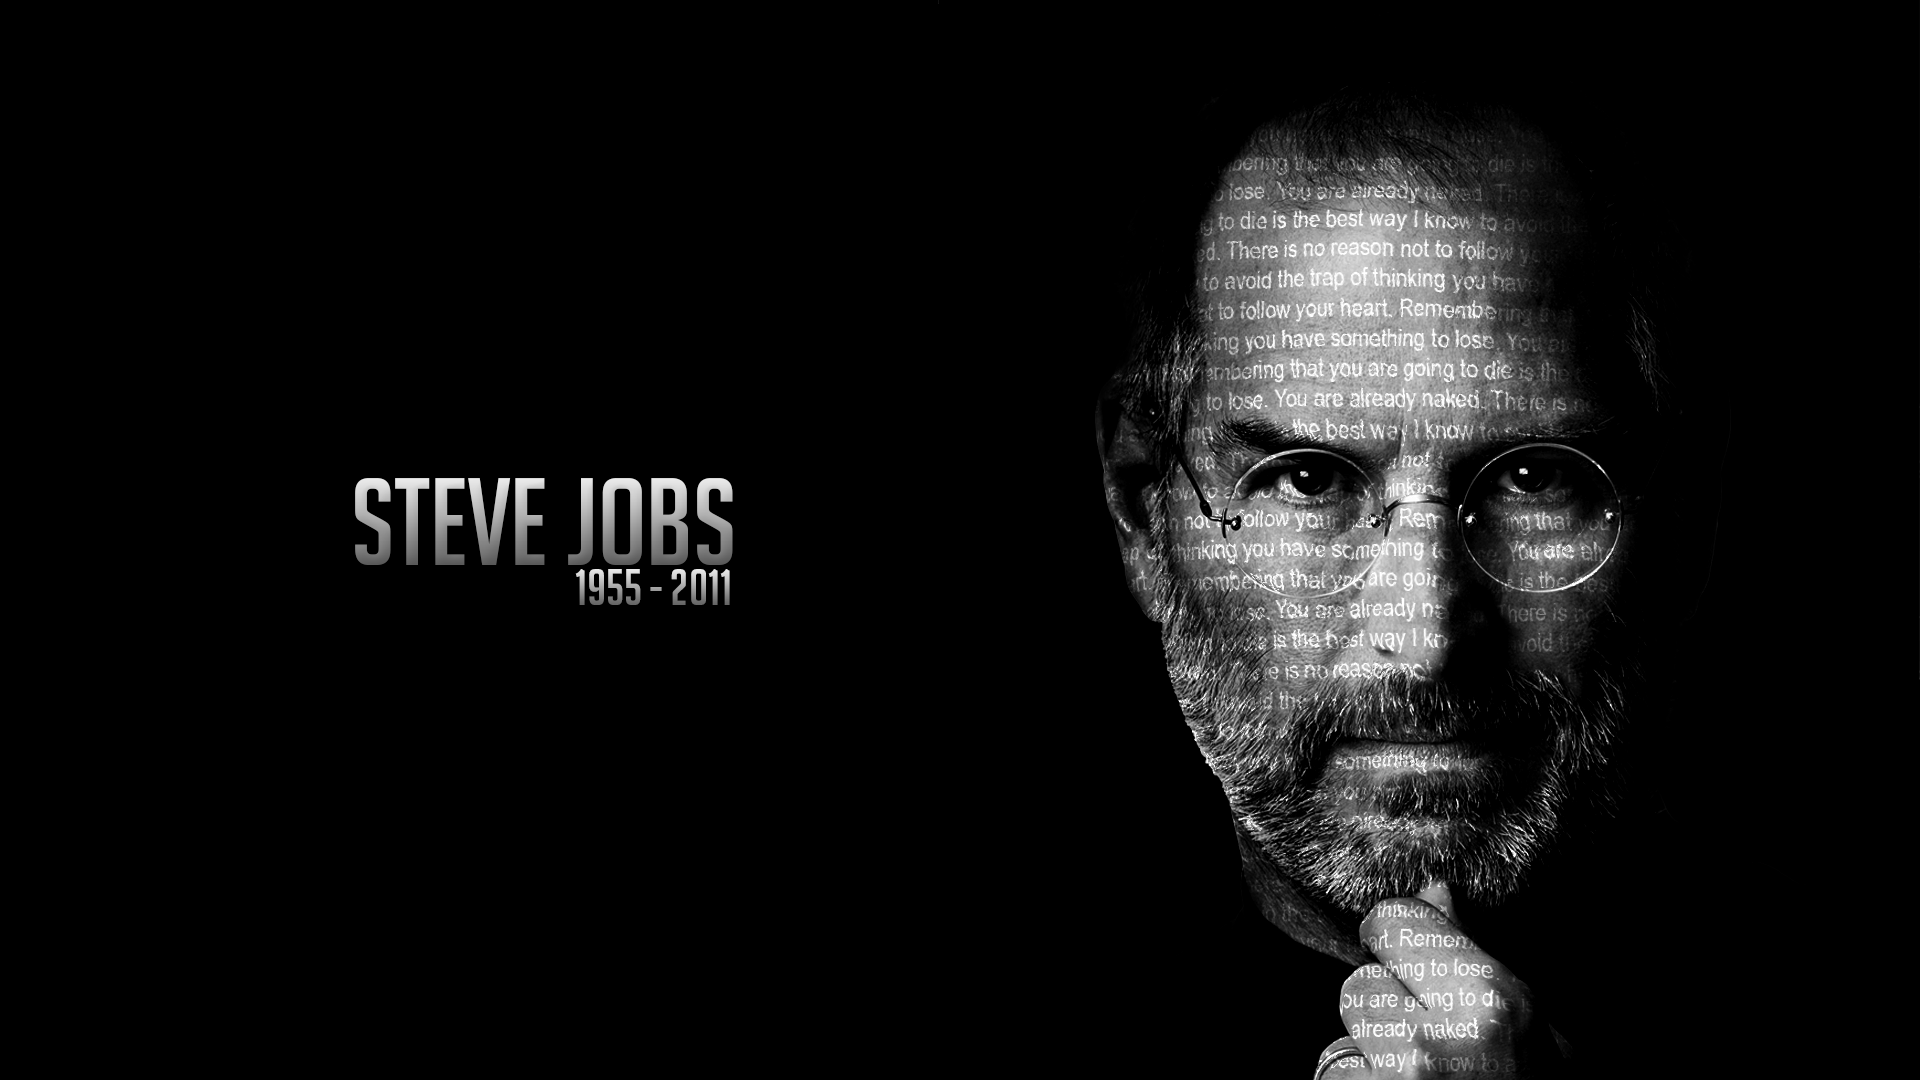 Steve Jobs | Image Typography Wallpaper by DesignedBy-Jack on ...